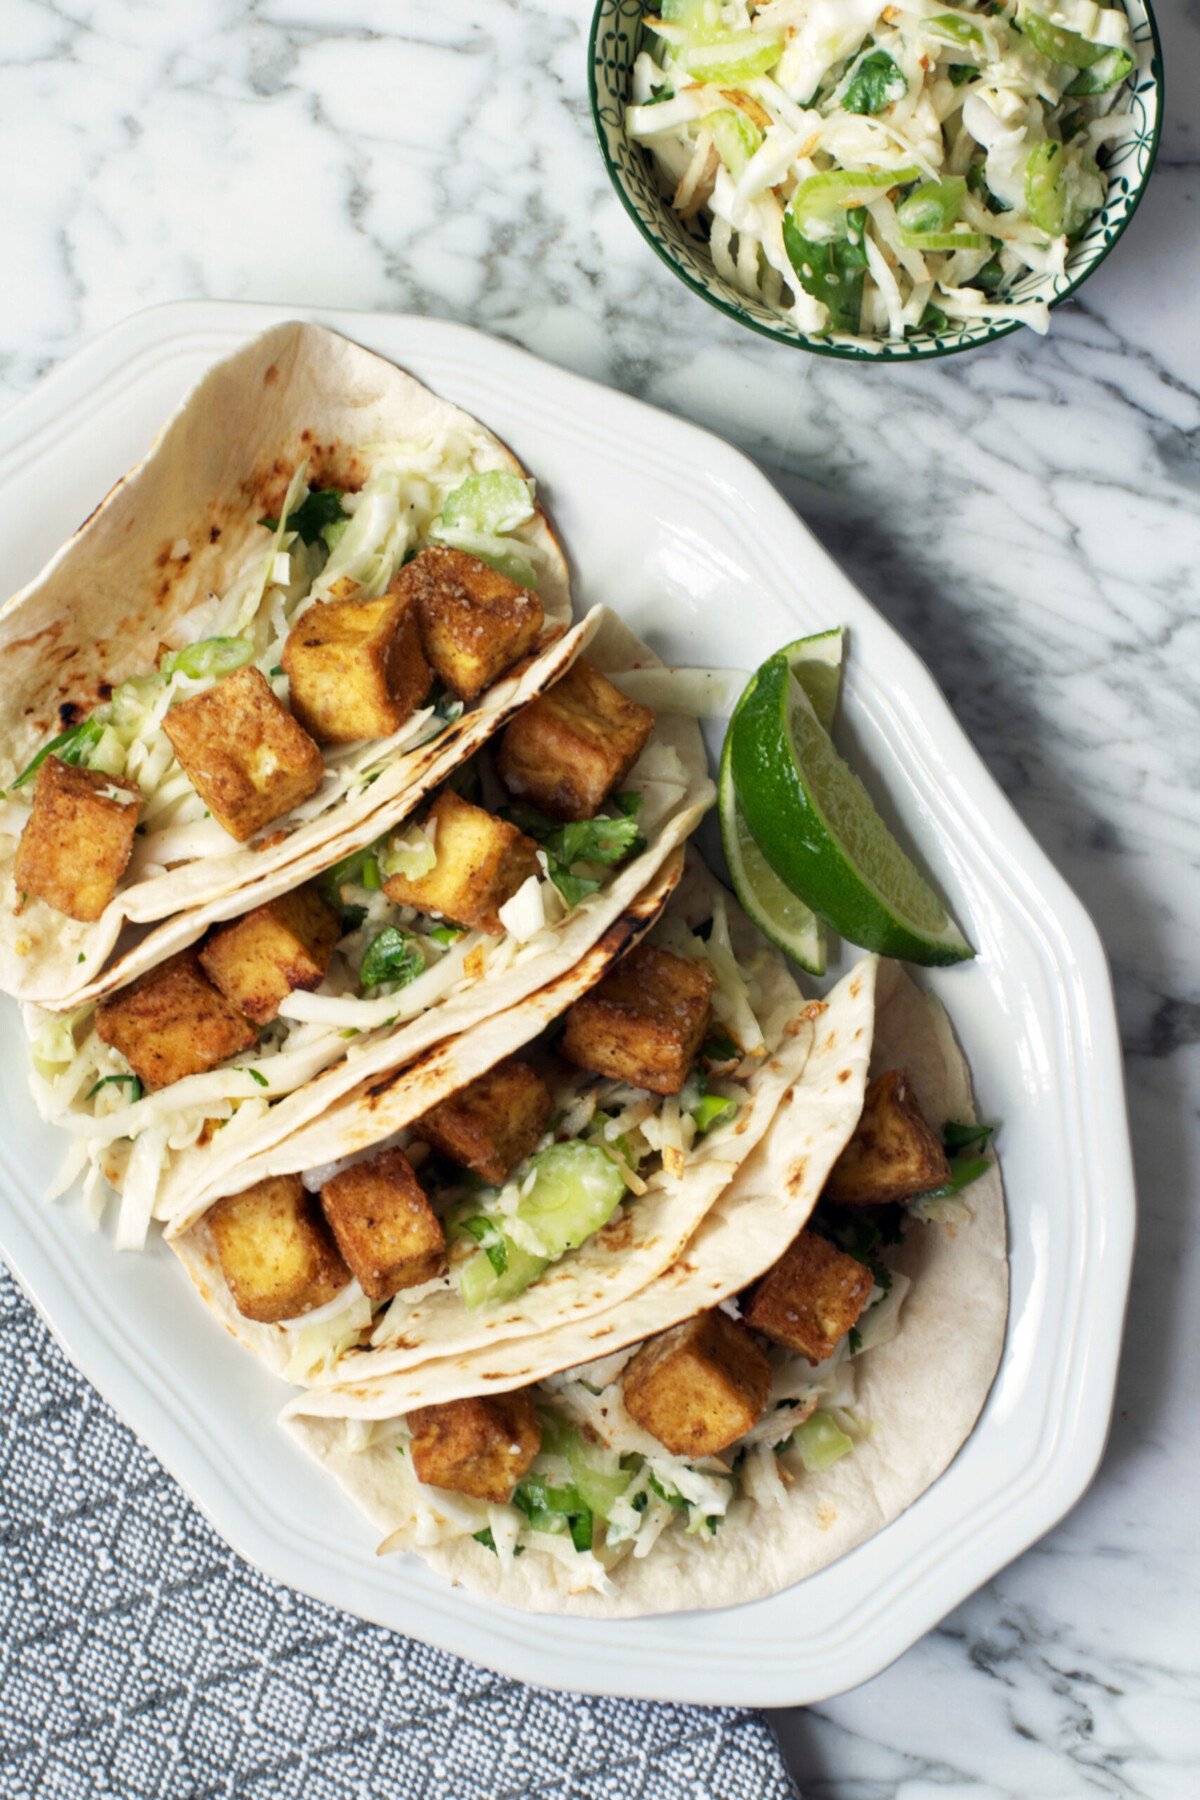 Photograph og tacos filled with crisp tofu and green slaw, arranged on an oval palte